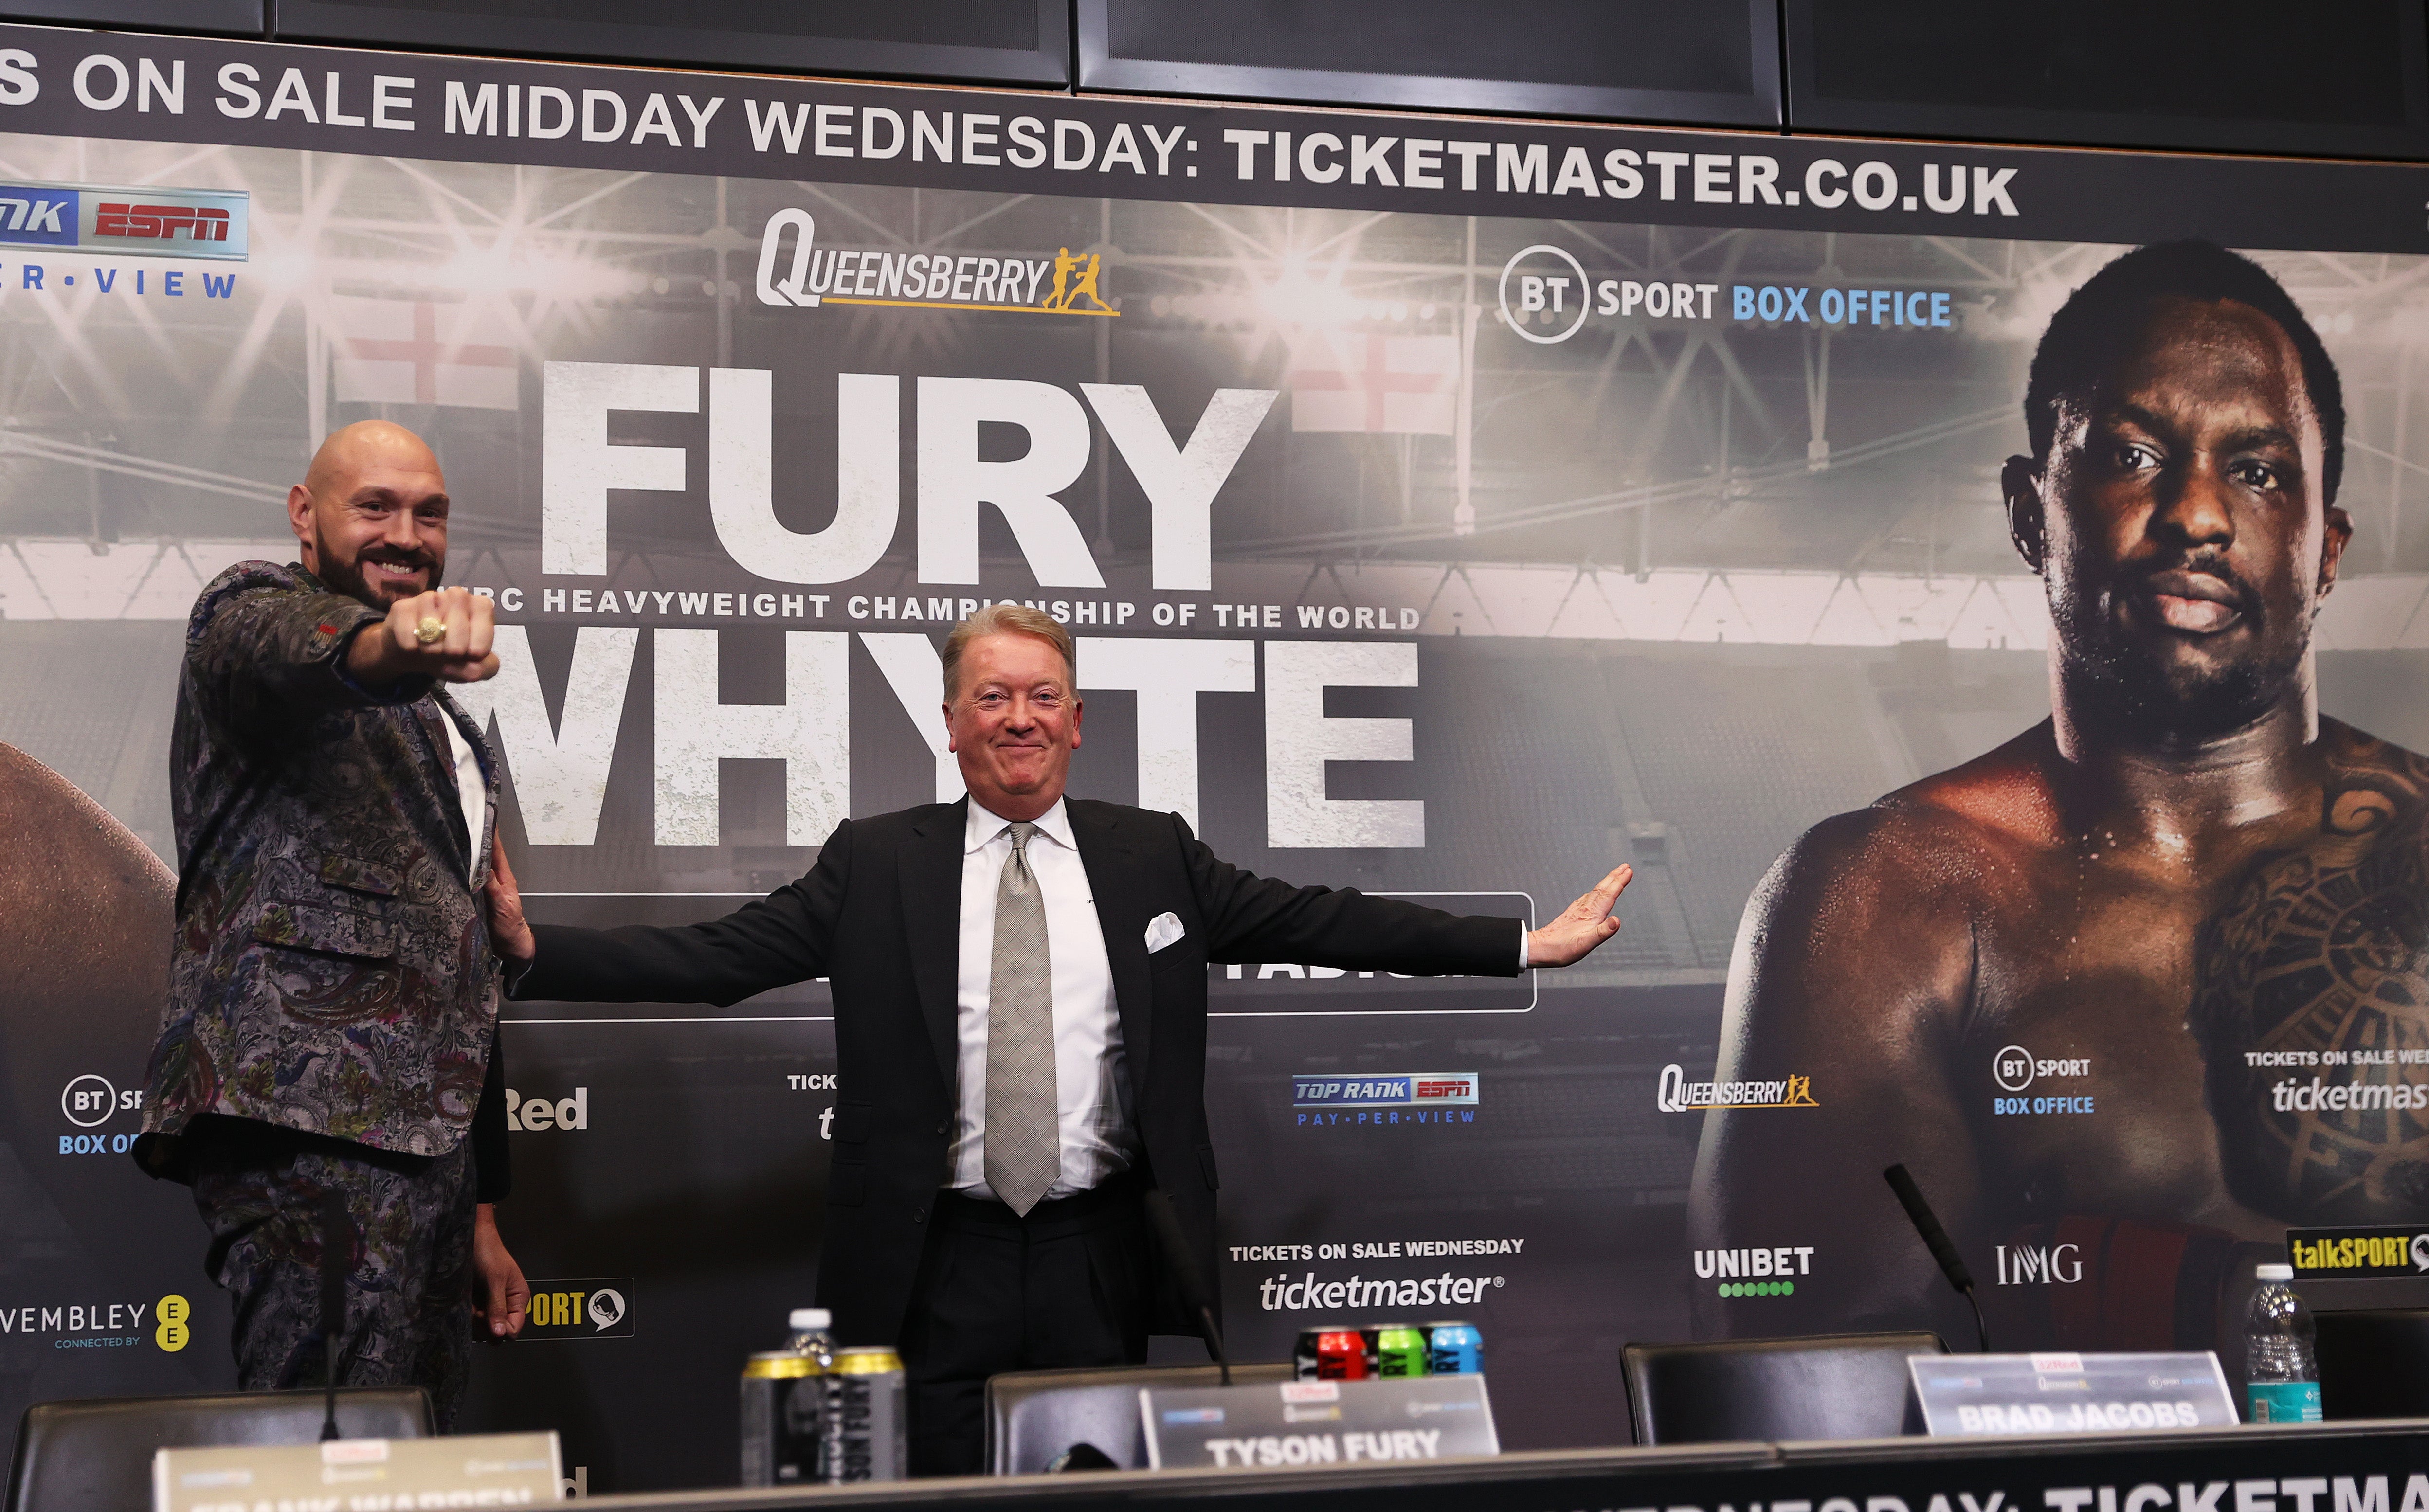 Tyson Fury (left) and promoter Frank Warren mock Dillian Whyte’s press conference no-show